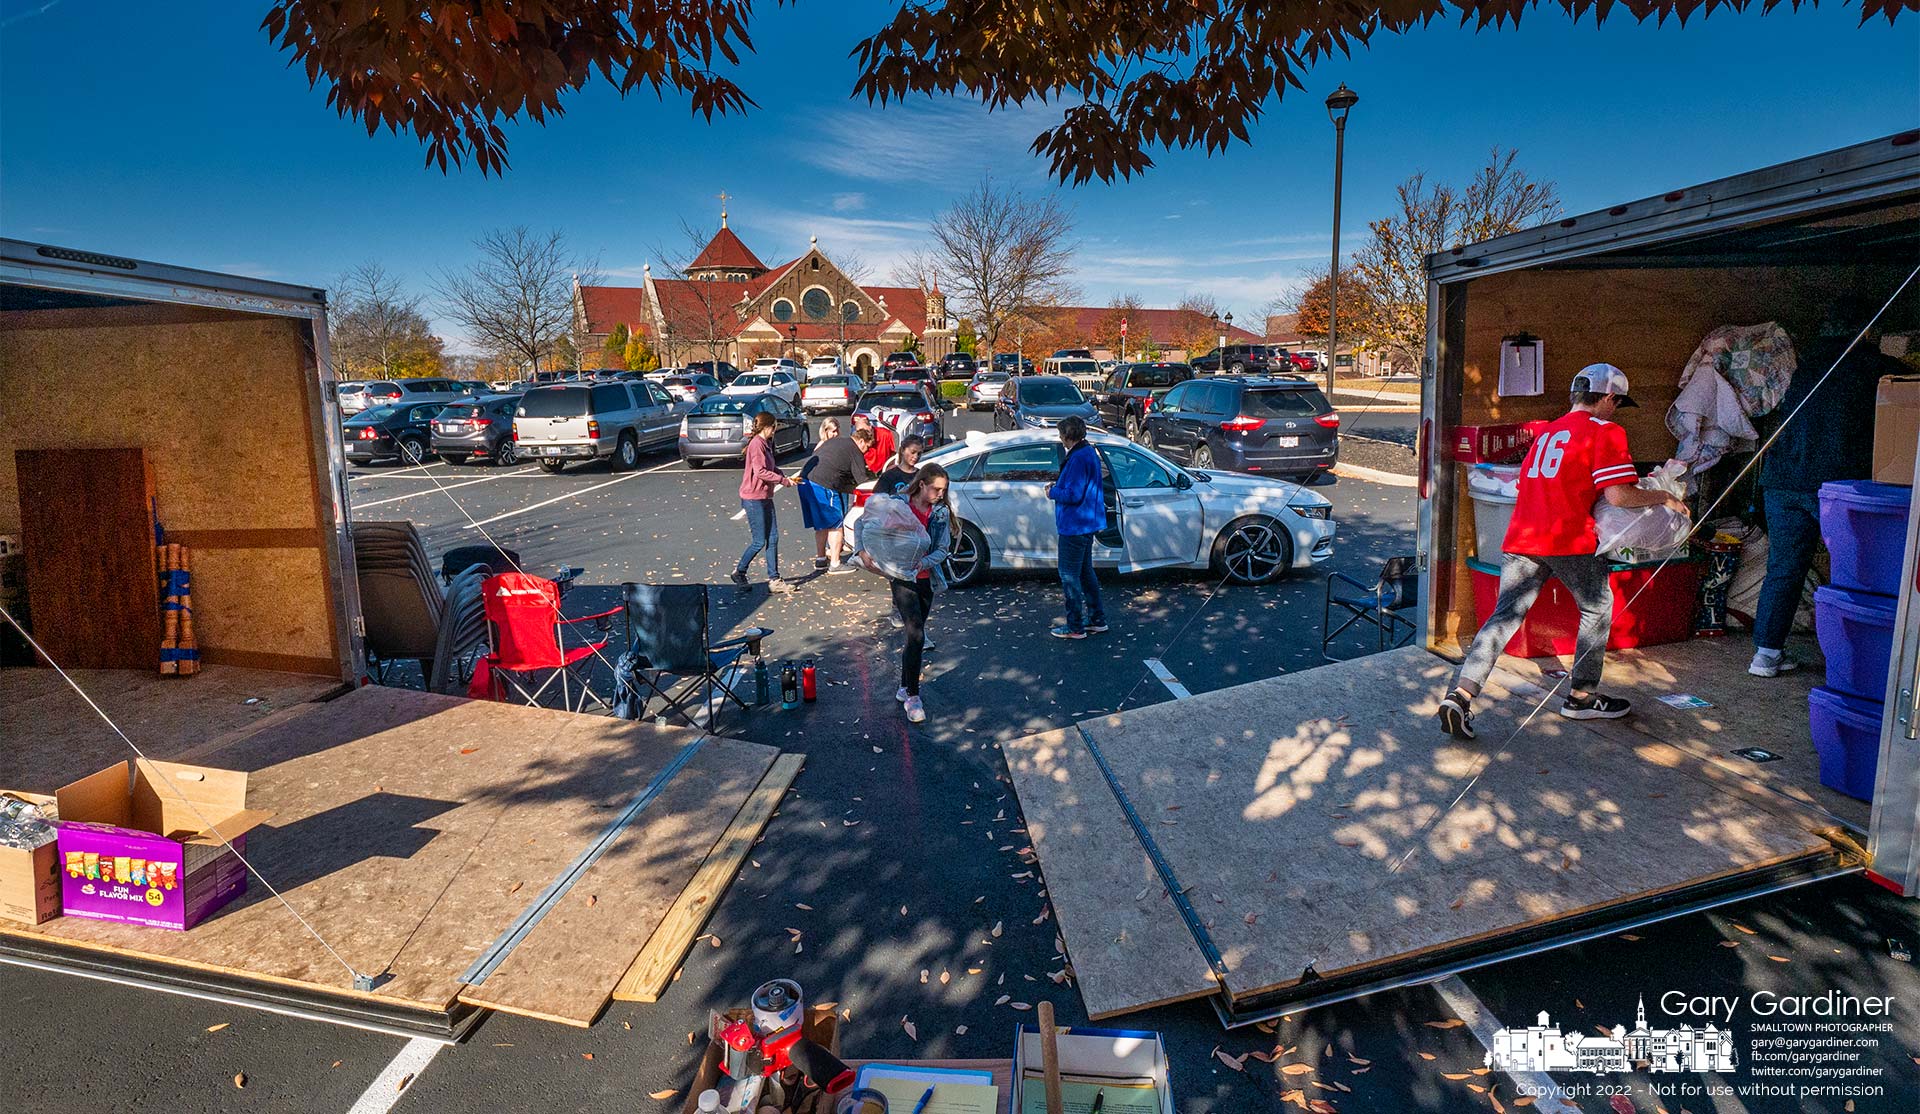 A volunteer crew collects donated household goods in the parking lot at St. Paul the Apostle Catholic Church and loads them into trailers to be later sported and cataloged for the St. Vincent DePaul Society's assistance programs. My Final Photo for October 23, 2022.